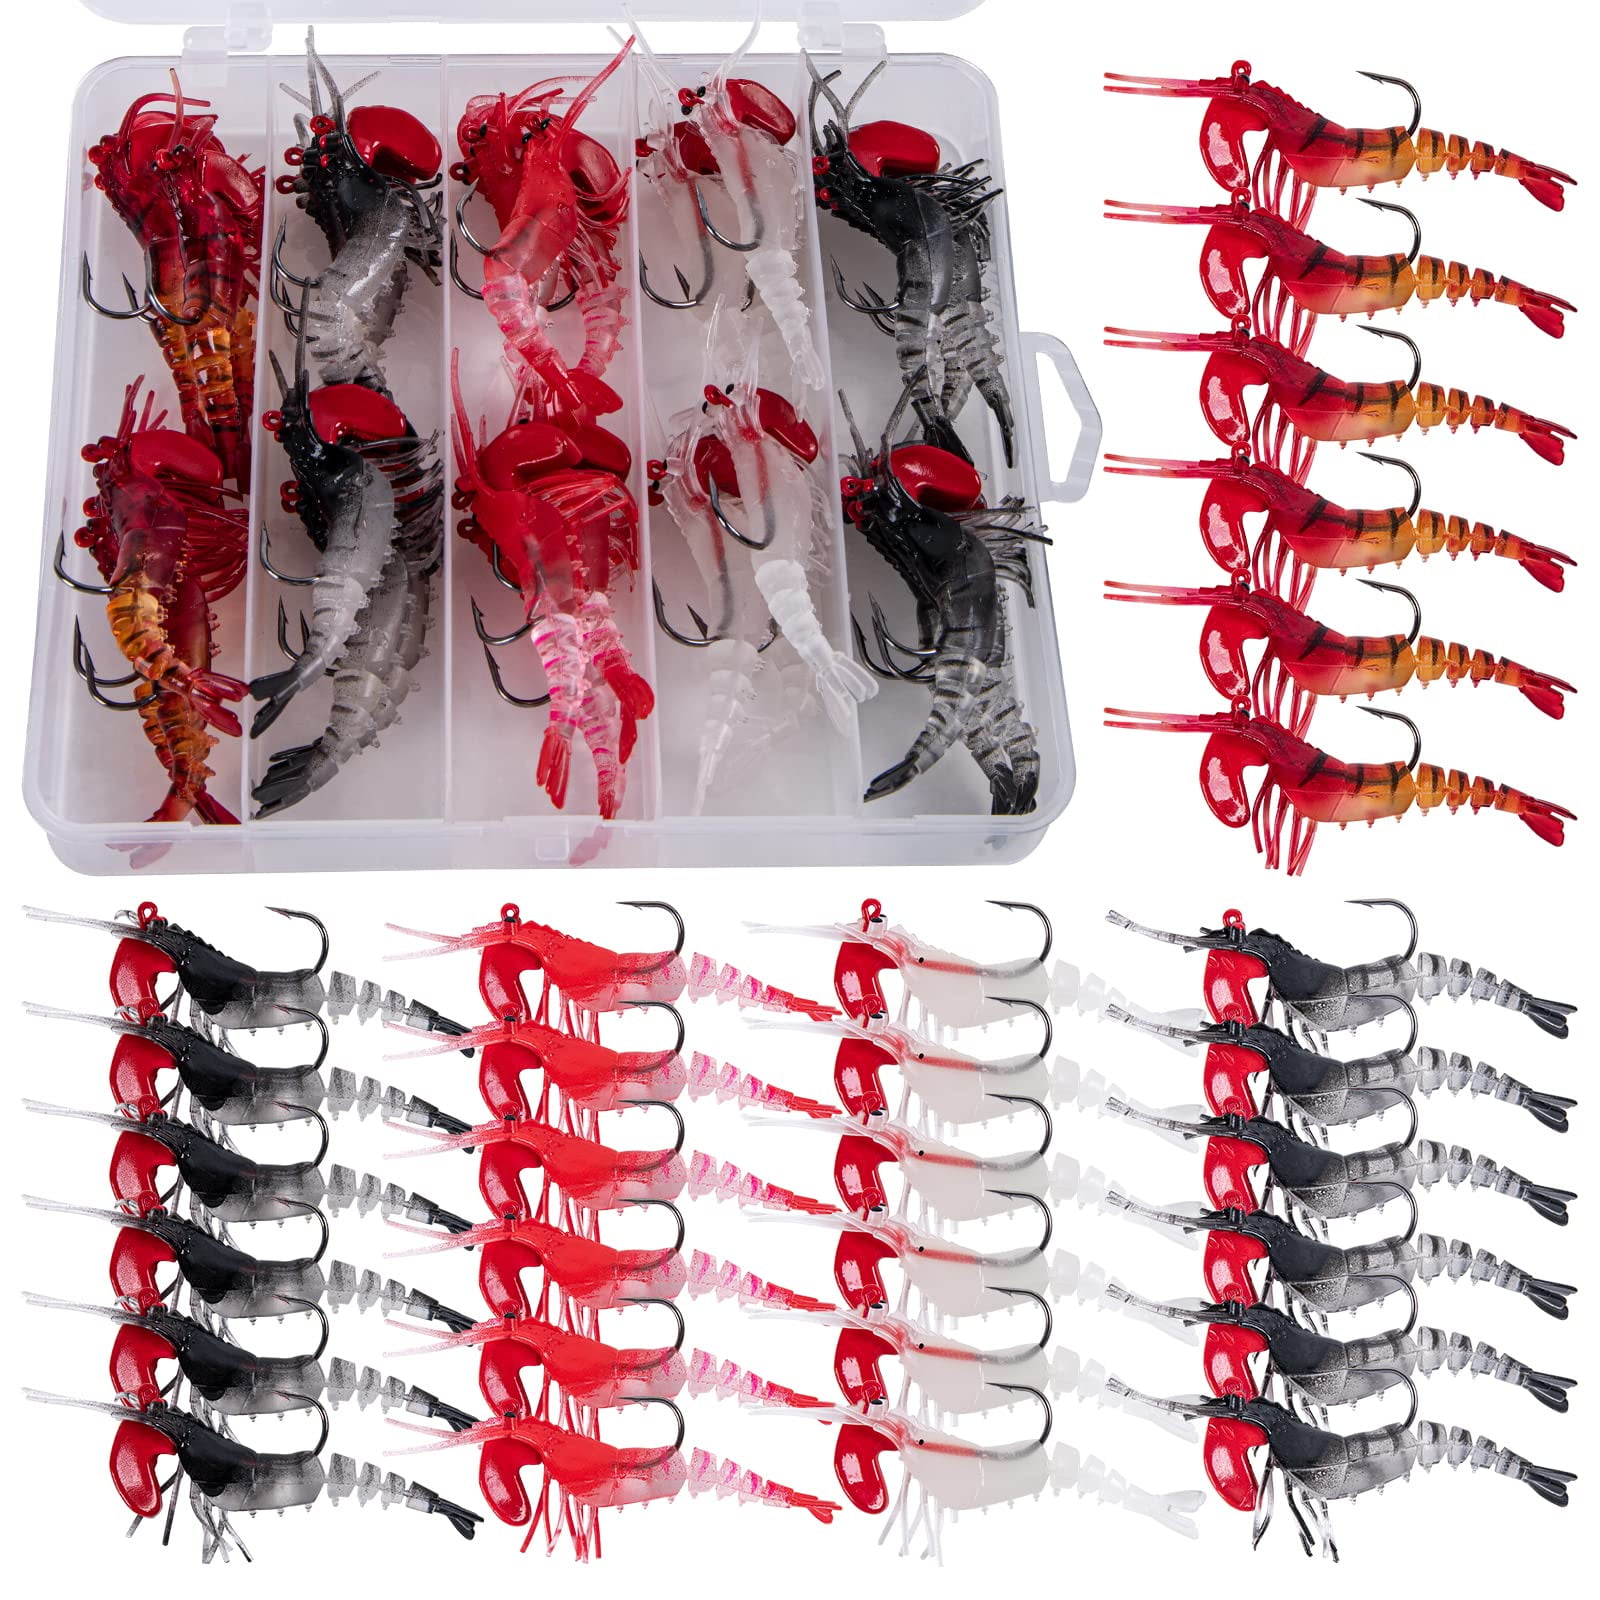 Goture Soft Shrimp Lures Fishing Saltwater Luminous Shrimp Bait Set Fishing  Lures with Sharp Hooks for Freshwater Saltwater Trout Bass Salmon Crappie  Walleye Pike Perch 